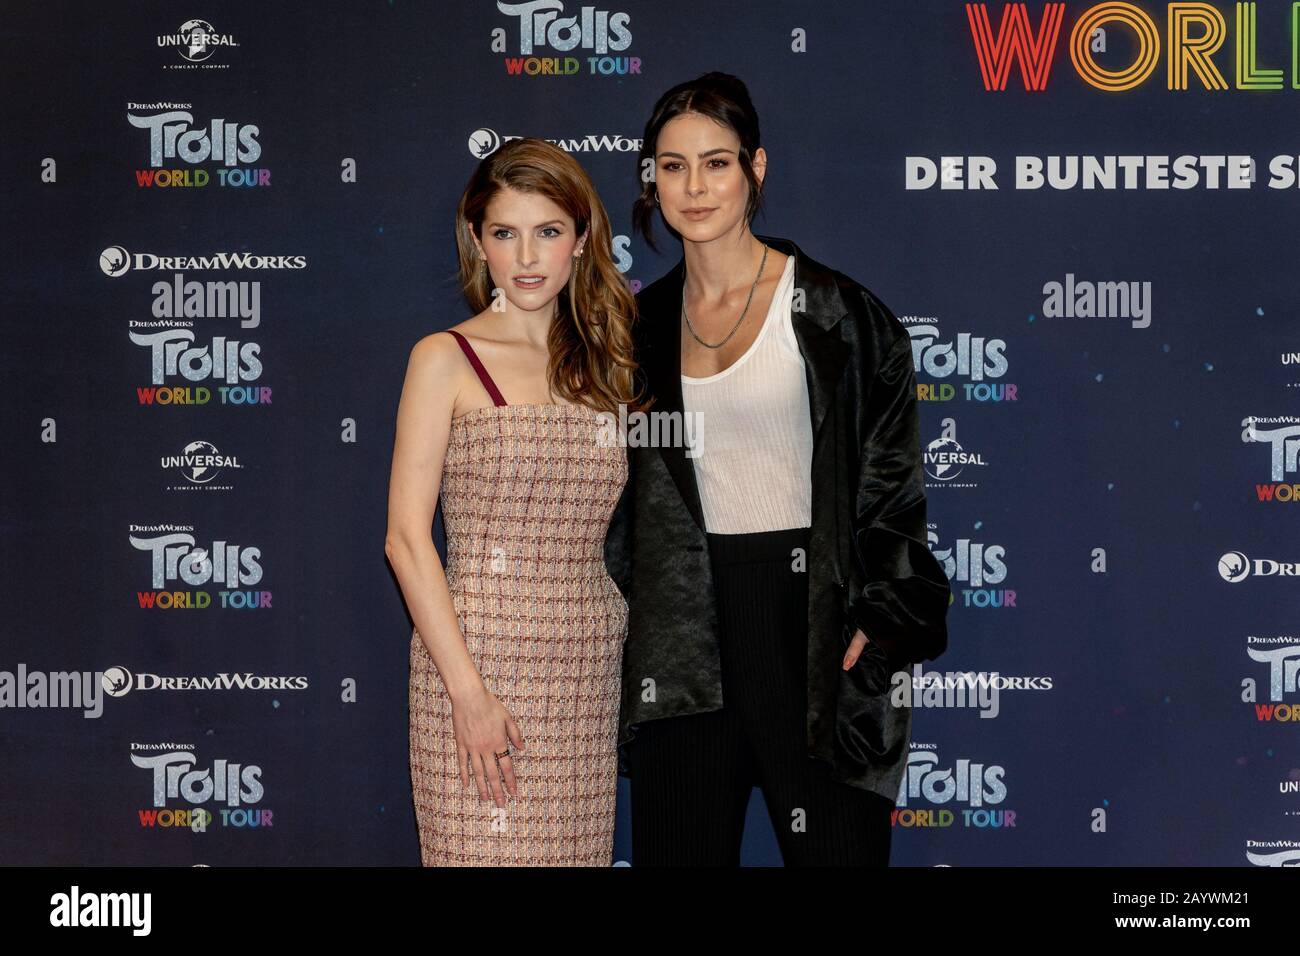 Berlin, Germany. 17th Feb, 2020. 17.02.2020, Anna Kendrick and Lena Meyer-Landrut at the photocall for the film Trolls World Tour at the Waldorf Astoria Hotel in Berlin. The new animated film from DreamWorks Animation, distributed by Universal Pictures International Germany, will be launched nationwide on April 23, 2020 in German cinemas. | usage worldwide Credit: dpa picture alliance/Alamy Live News Stock Photo